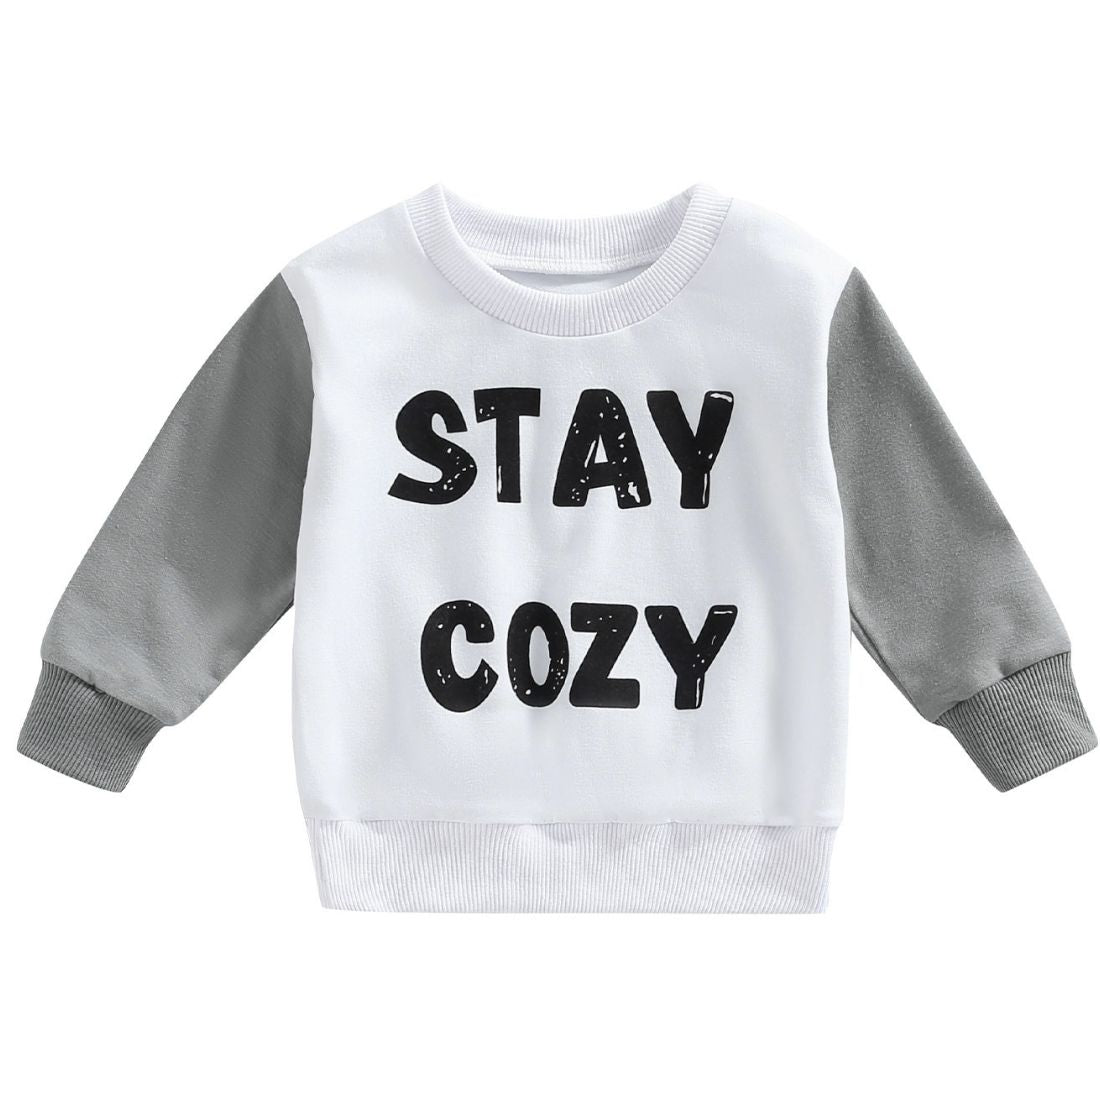 Long sleeve Sweaty with Grey sleeves and Stay Cozy letter print in Stay Cozy Baby Sweatshirt